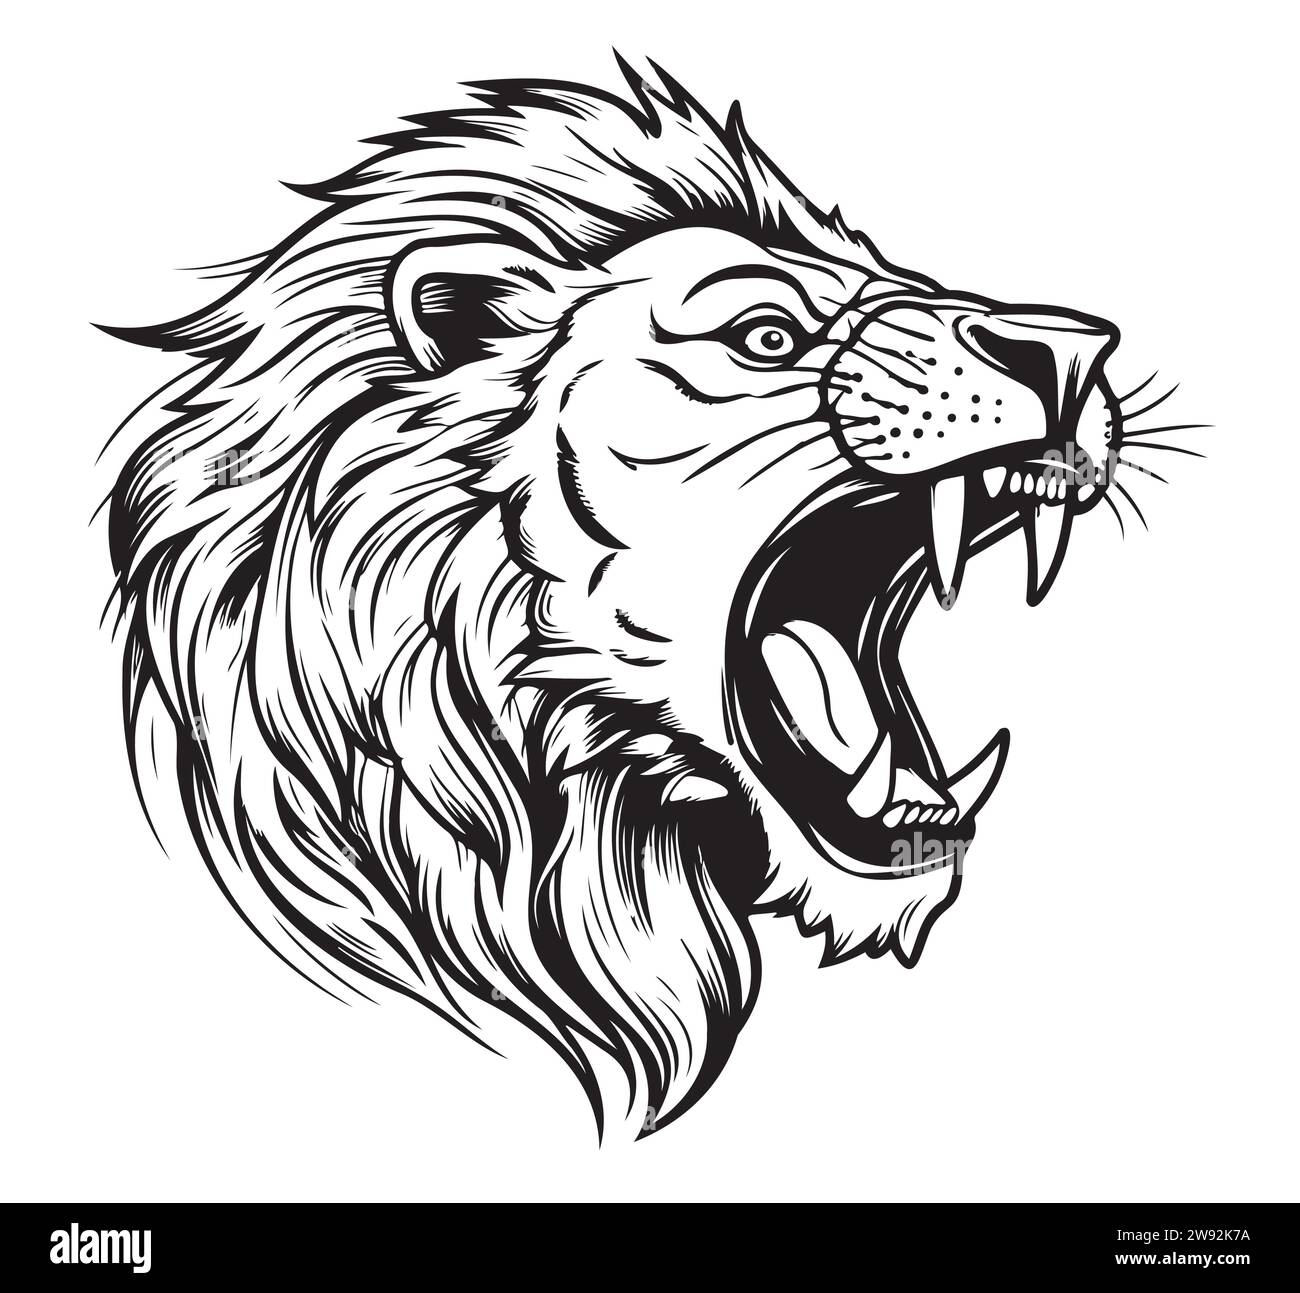 Roaring Lion face . Sketchy, graphical, black and white portrait of a lions head on a white background. Vector illustration Stock Vector